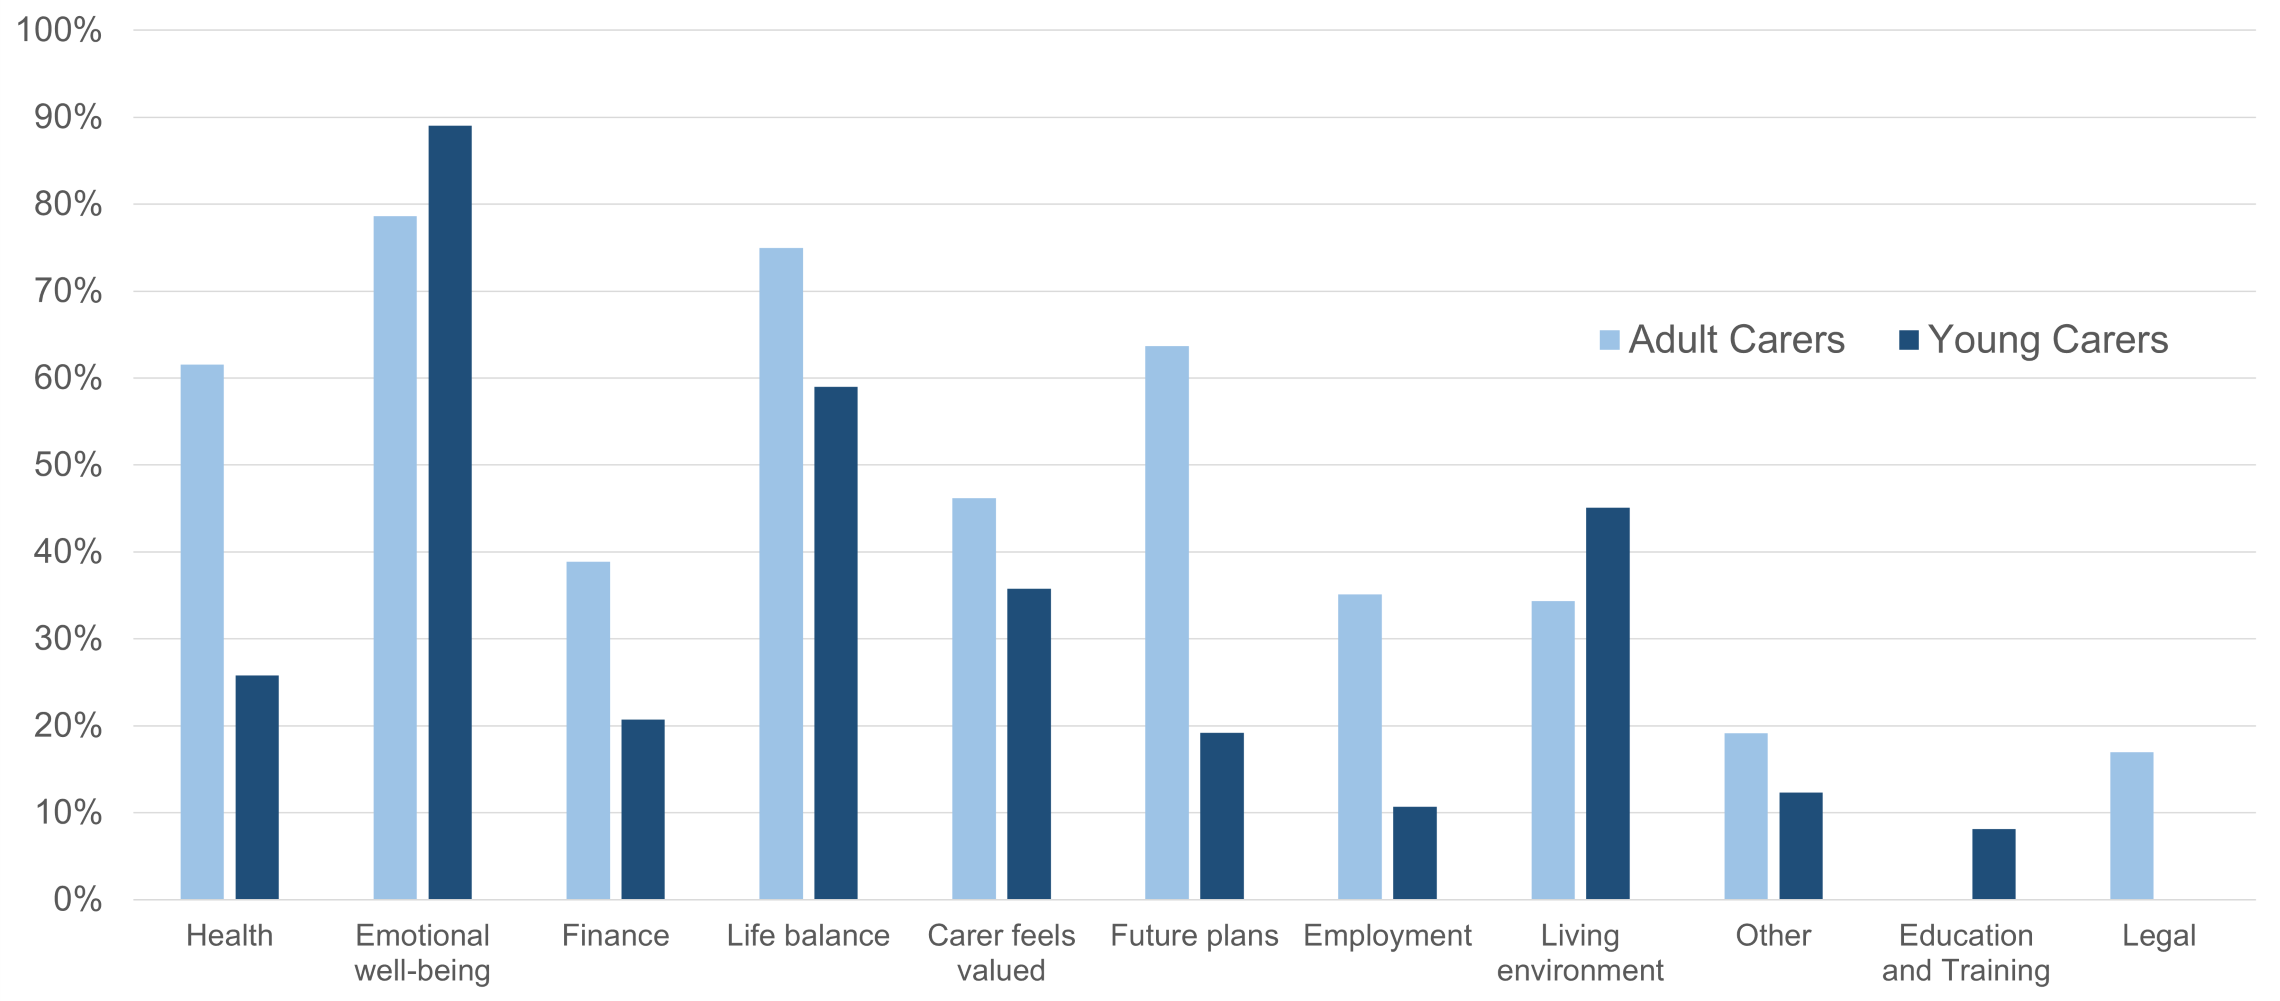 Bar chart showing the impacts of caring for young and adult carers. The most common impacts experienced by both young and adult carers were on emotional wellbeing and life balance.